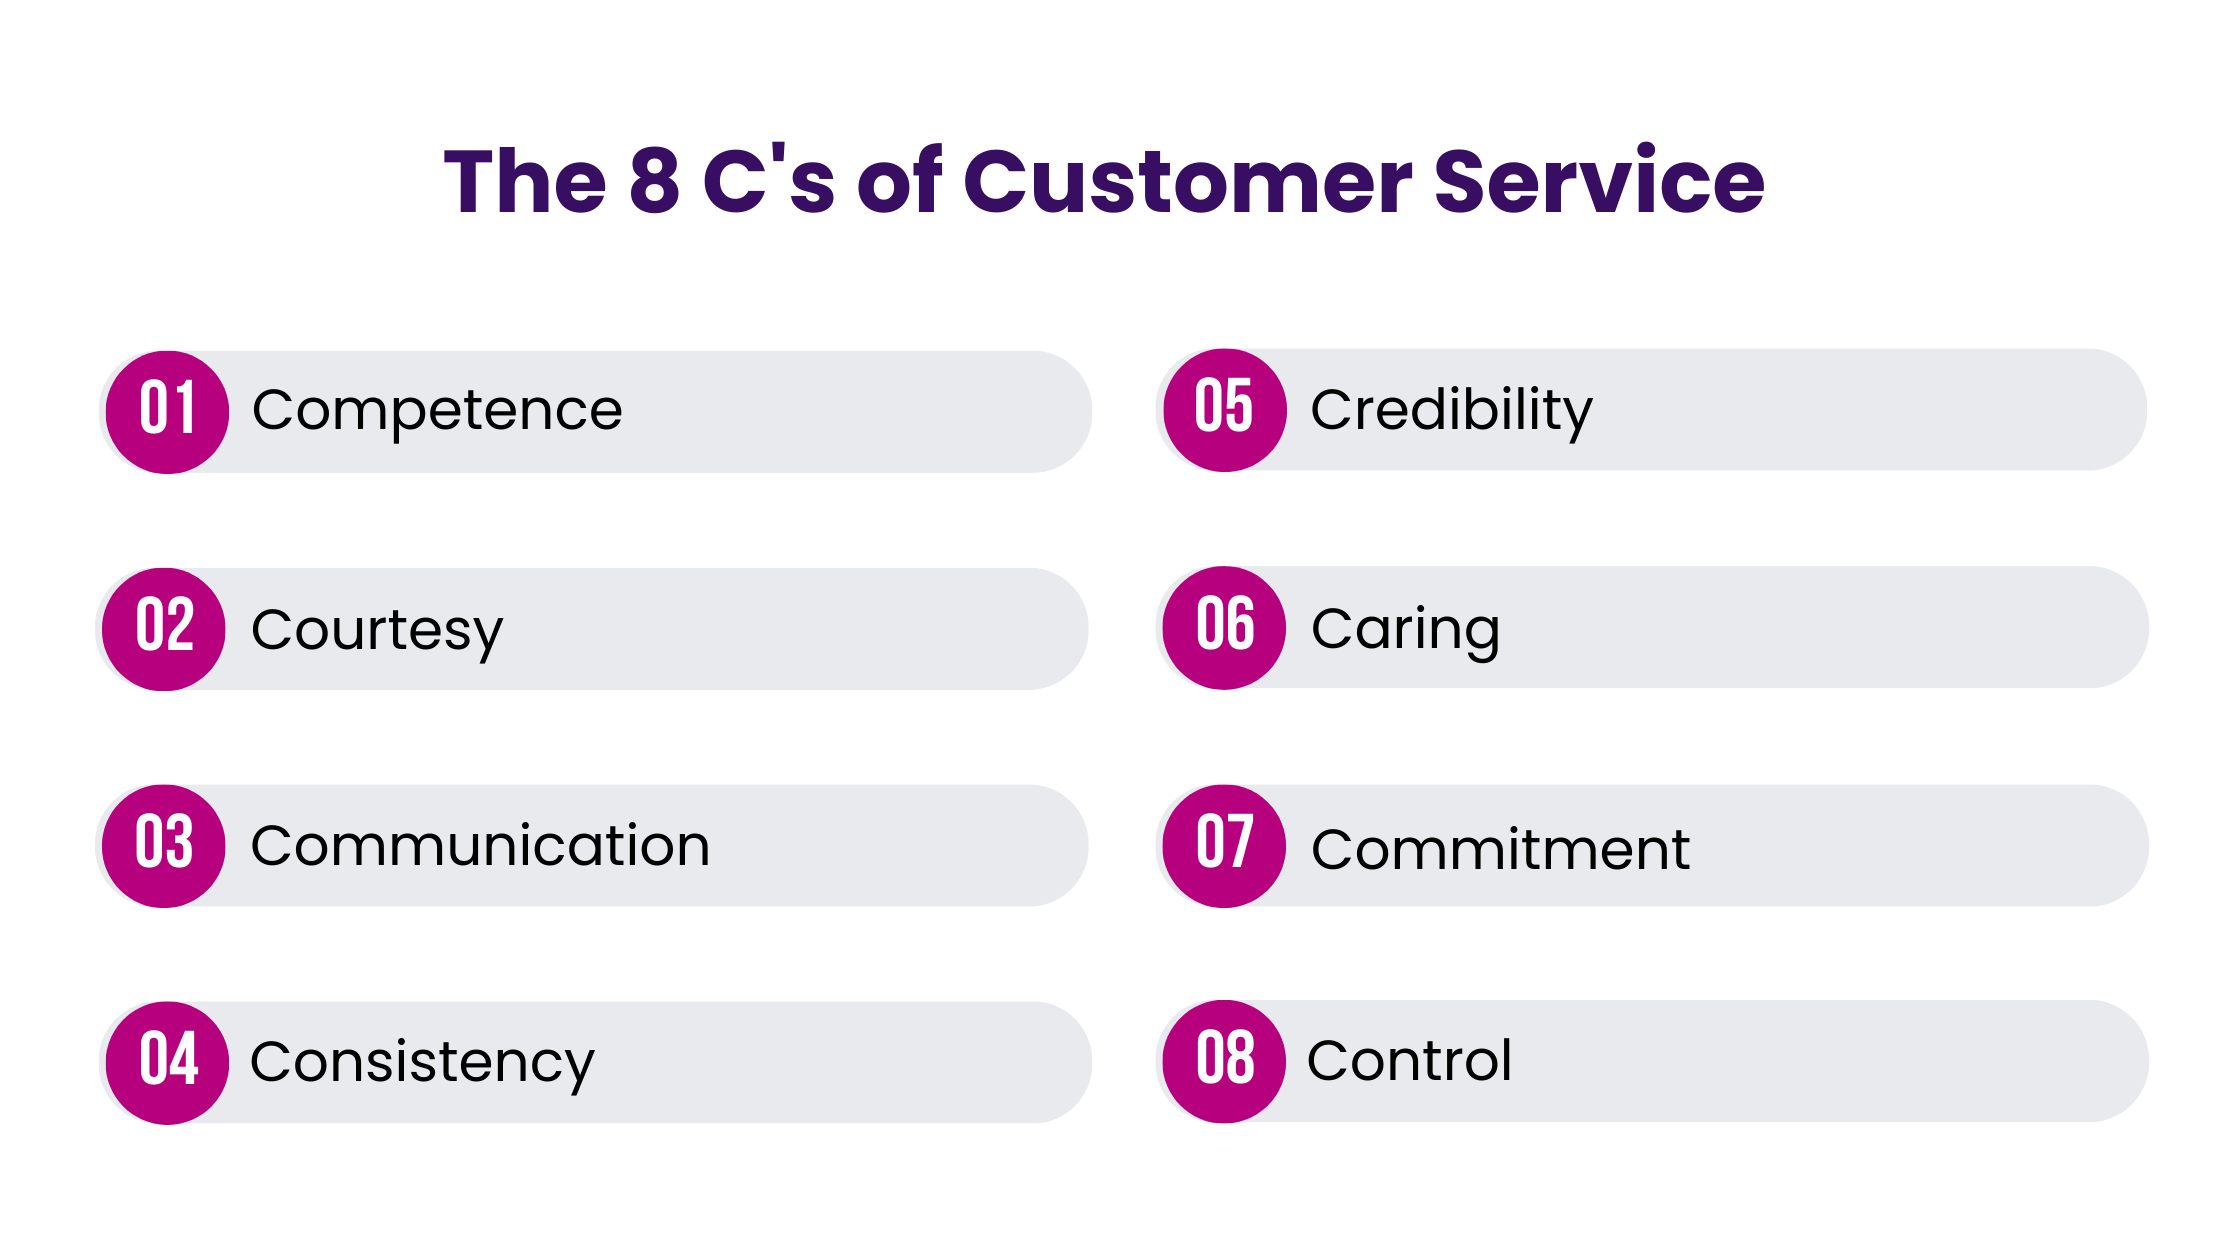 The 8 C's of Customer Service